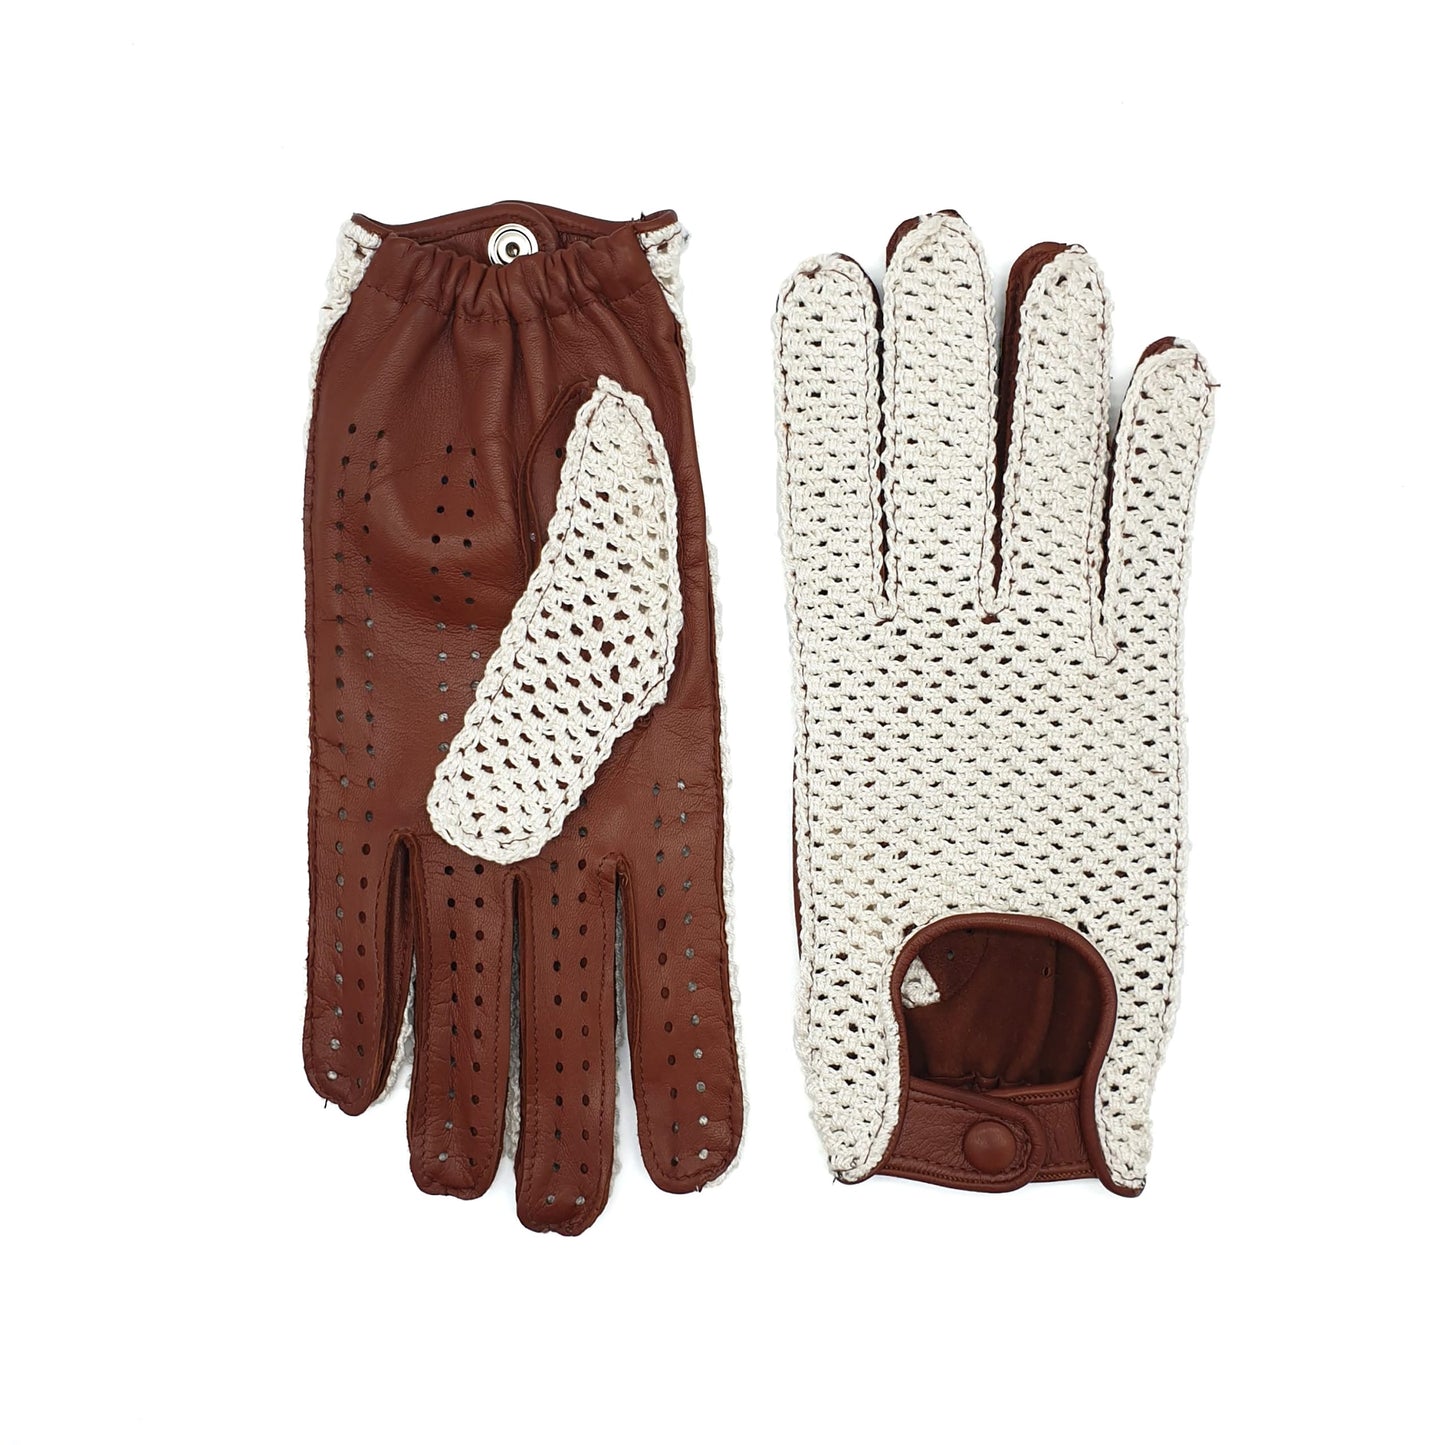 Men's cognac leather driving gloves with crochet top